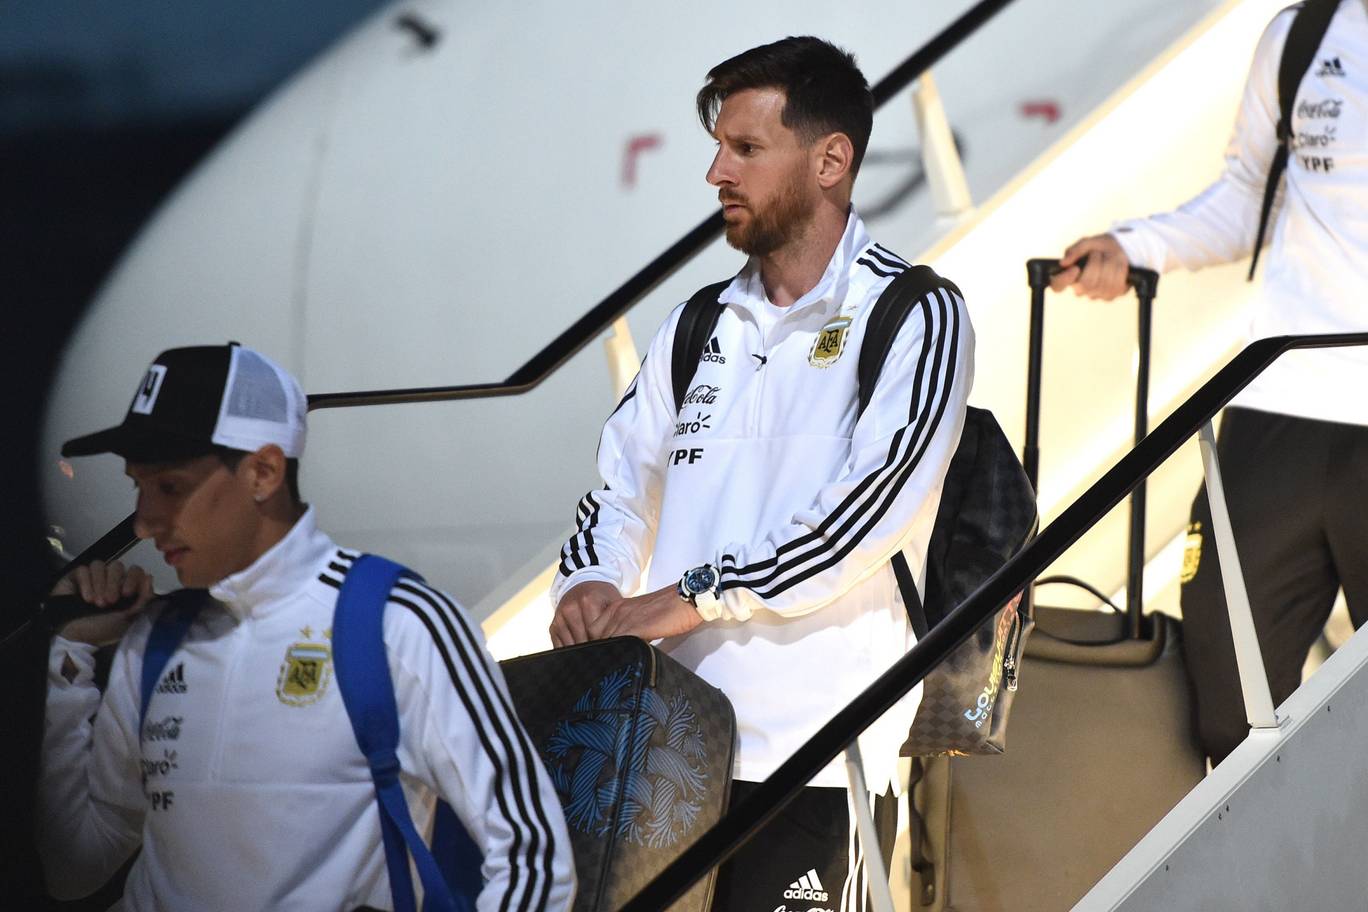 Argentinas forward Lionel Messi R disembarks from a plane at the Zhukovsky airport near Moscow as Argentinas national football team arrives ahead of the Russia 2018 World Cup